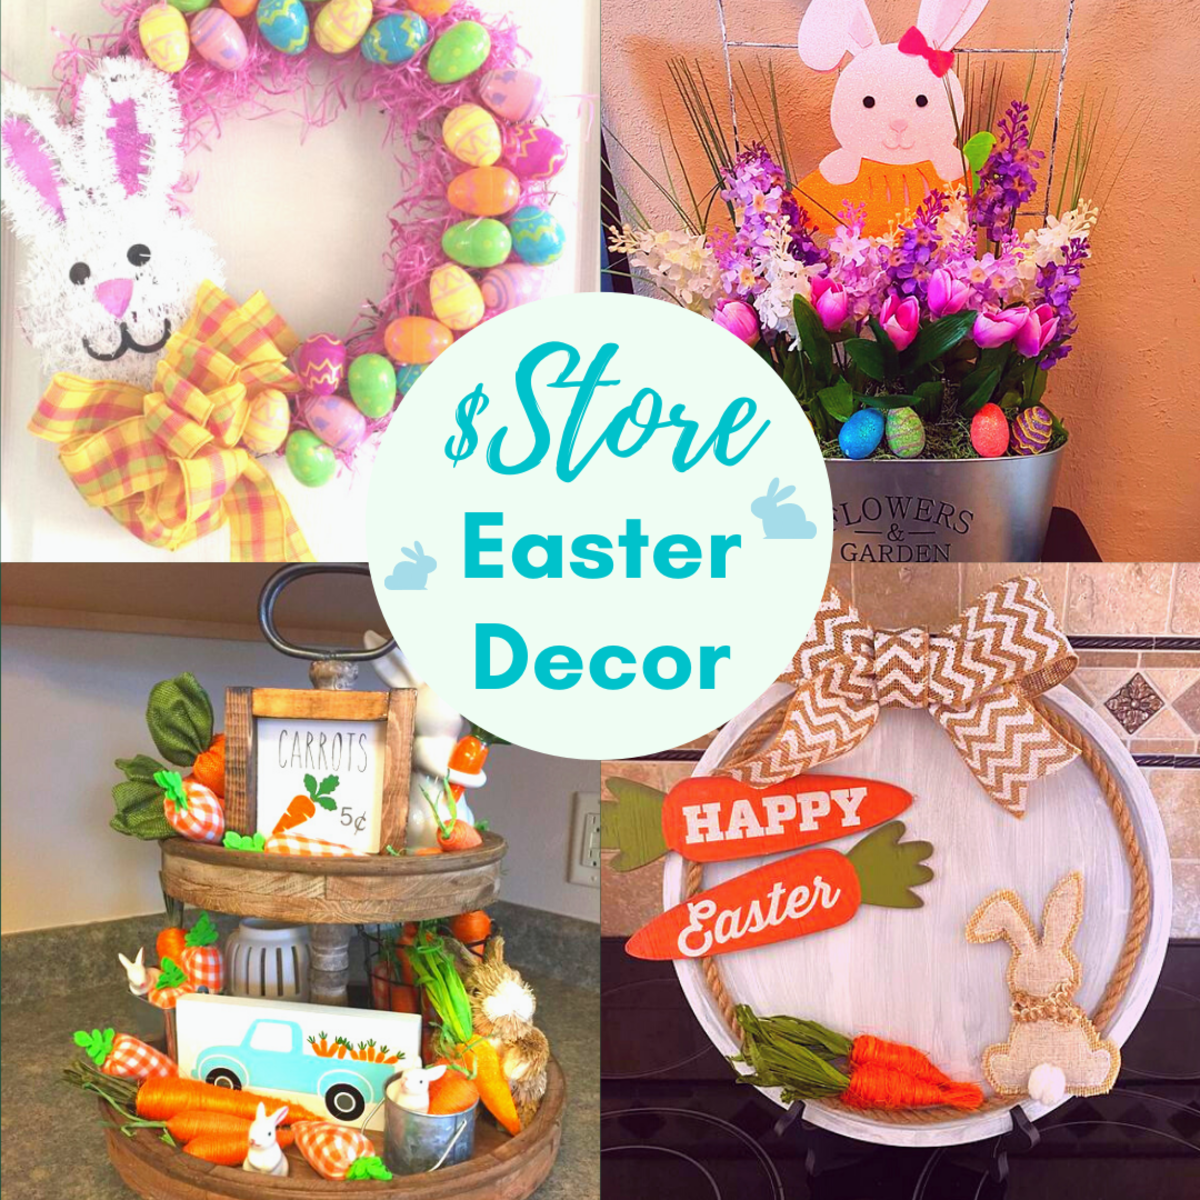 Cute Easter decorations that won't break the bank